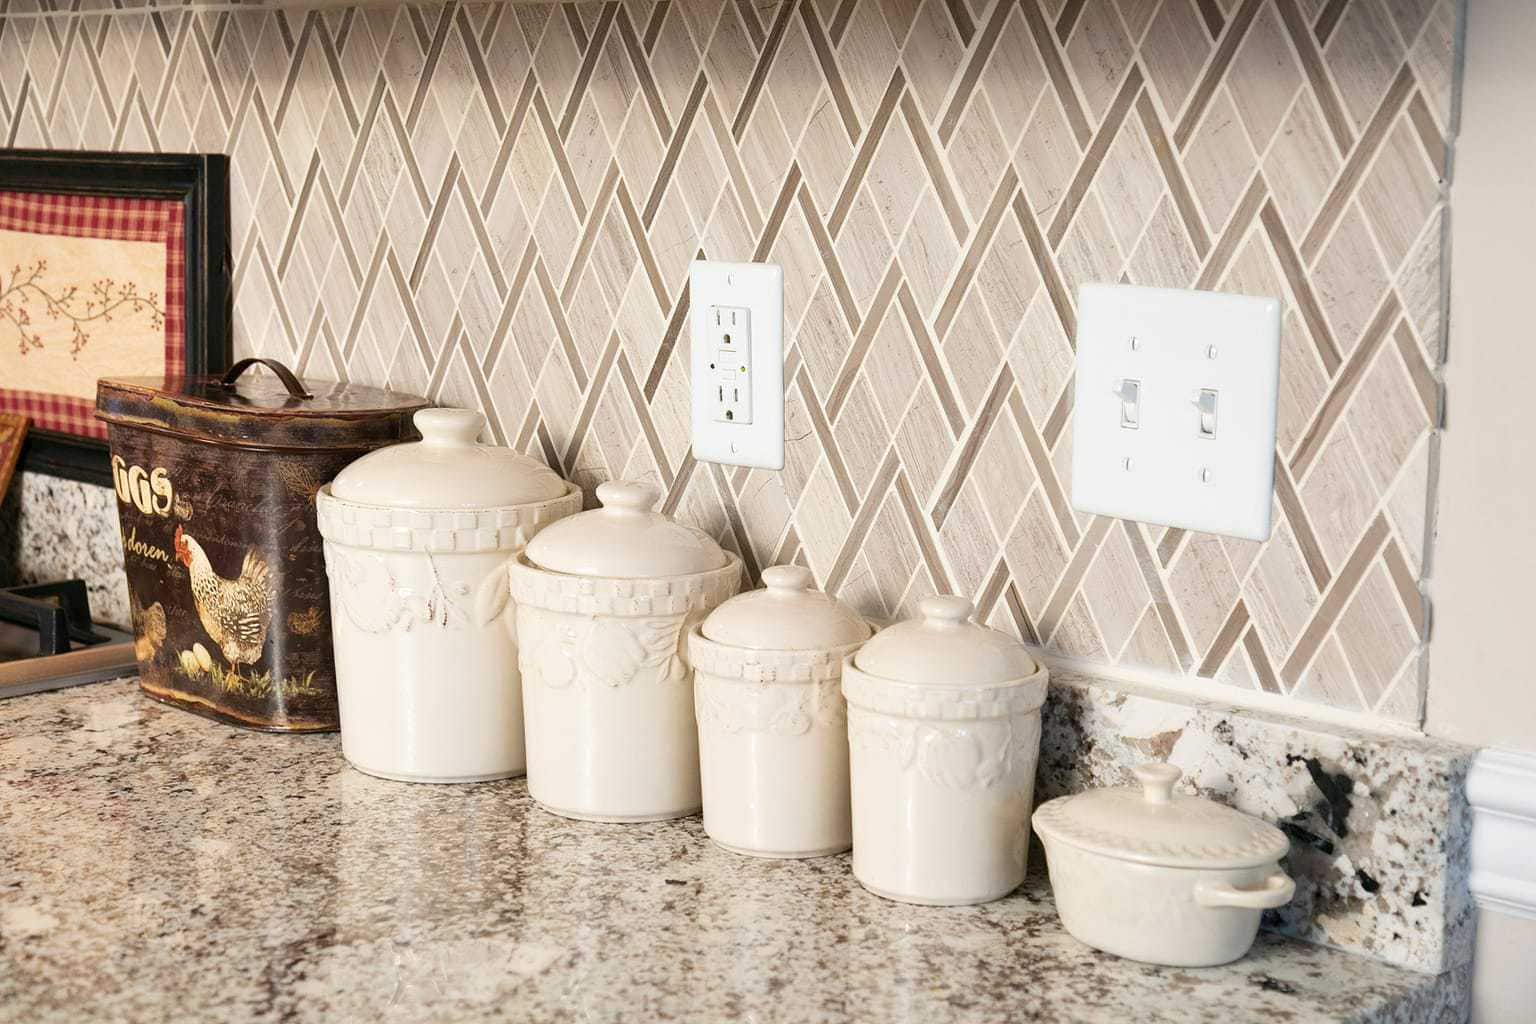 Kitchen Tile Backsplash Ideas That Are Easy And Inexpensive